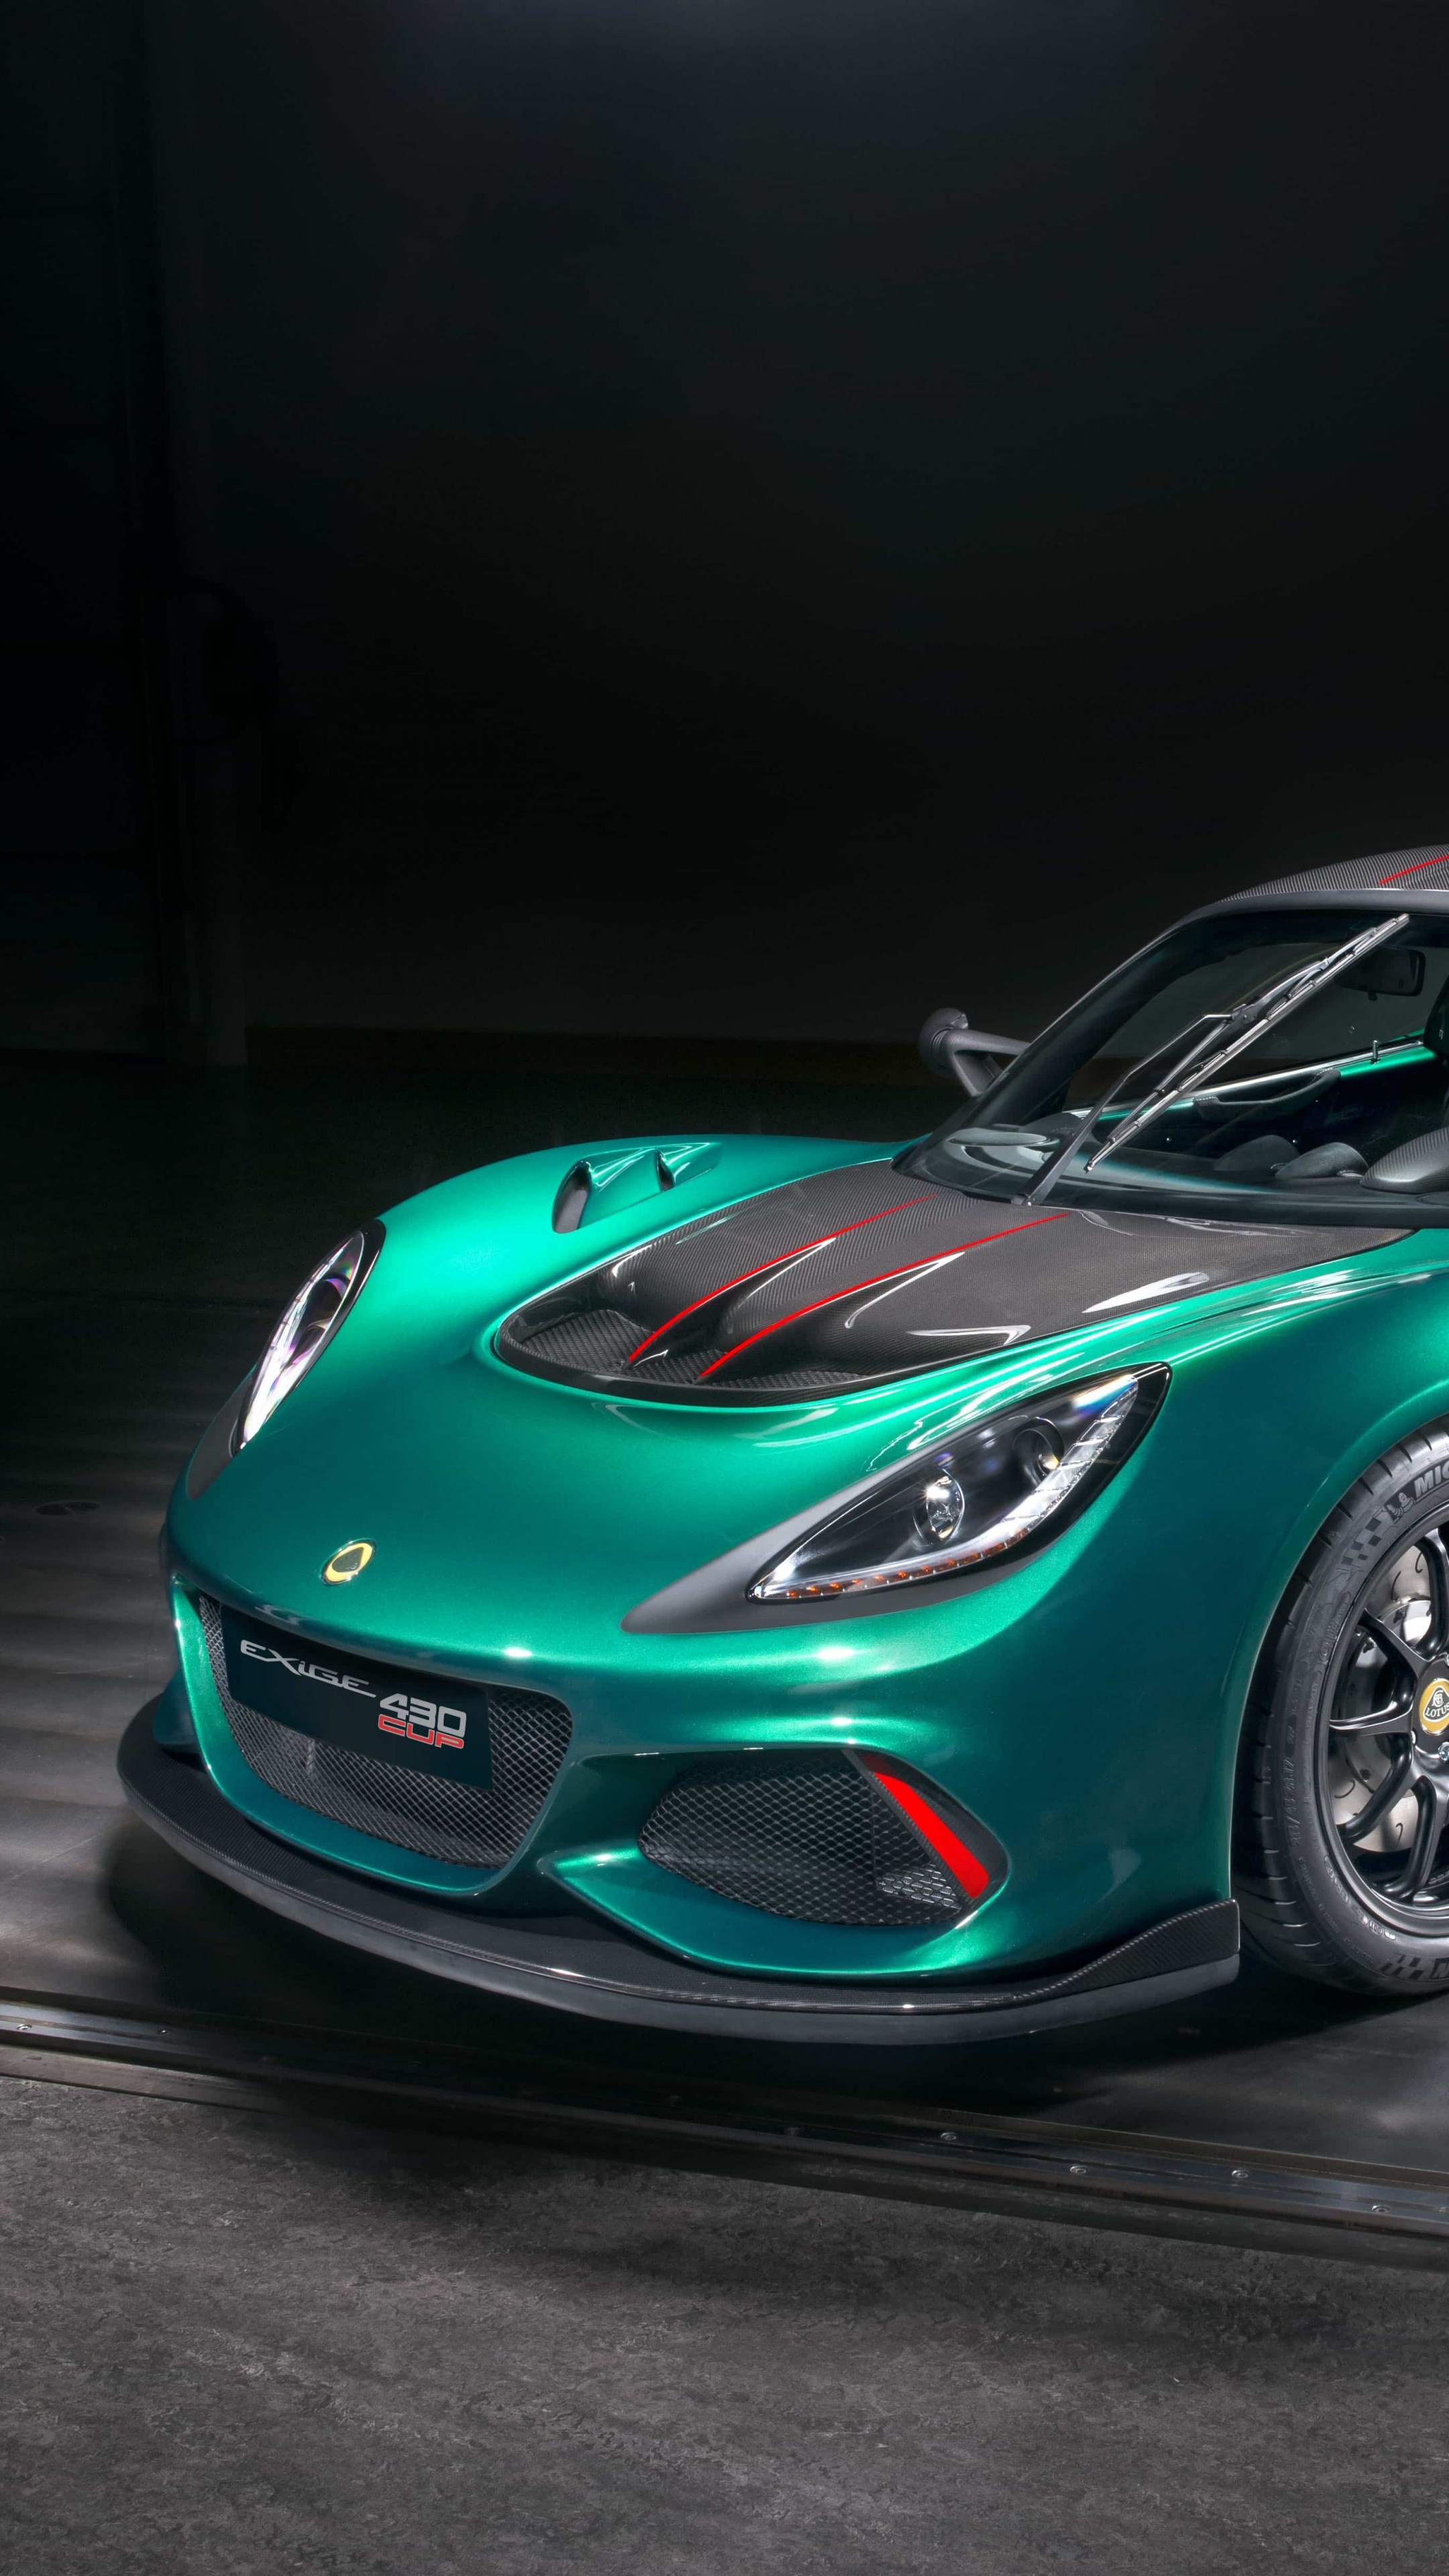 Lotus Exige Cup 430 2018, Breathtaking beauty, Ultimate performance, Sports car perfection, 2160x3840 4K Phone